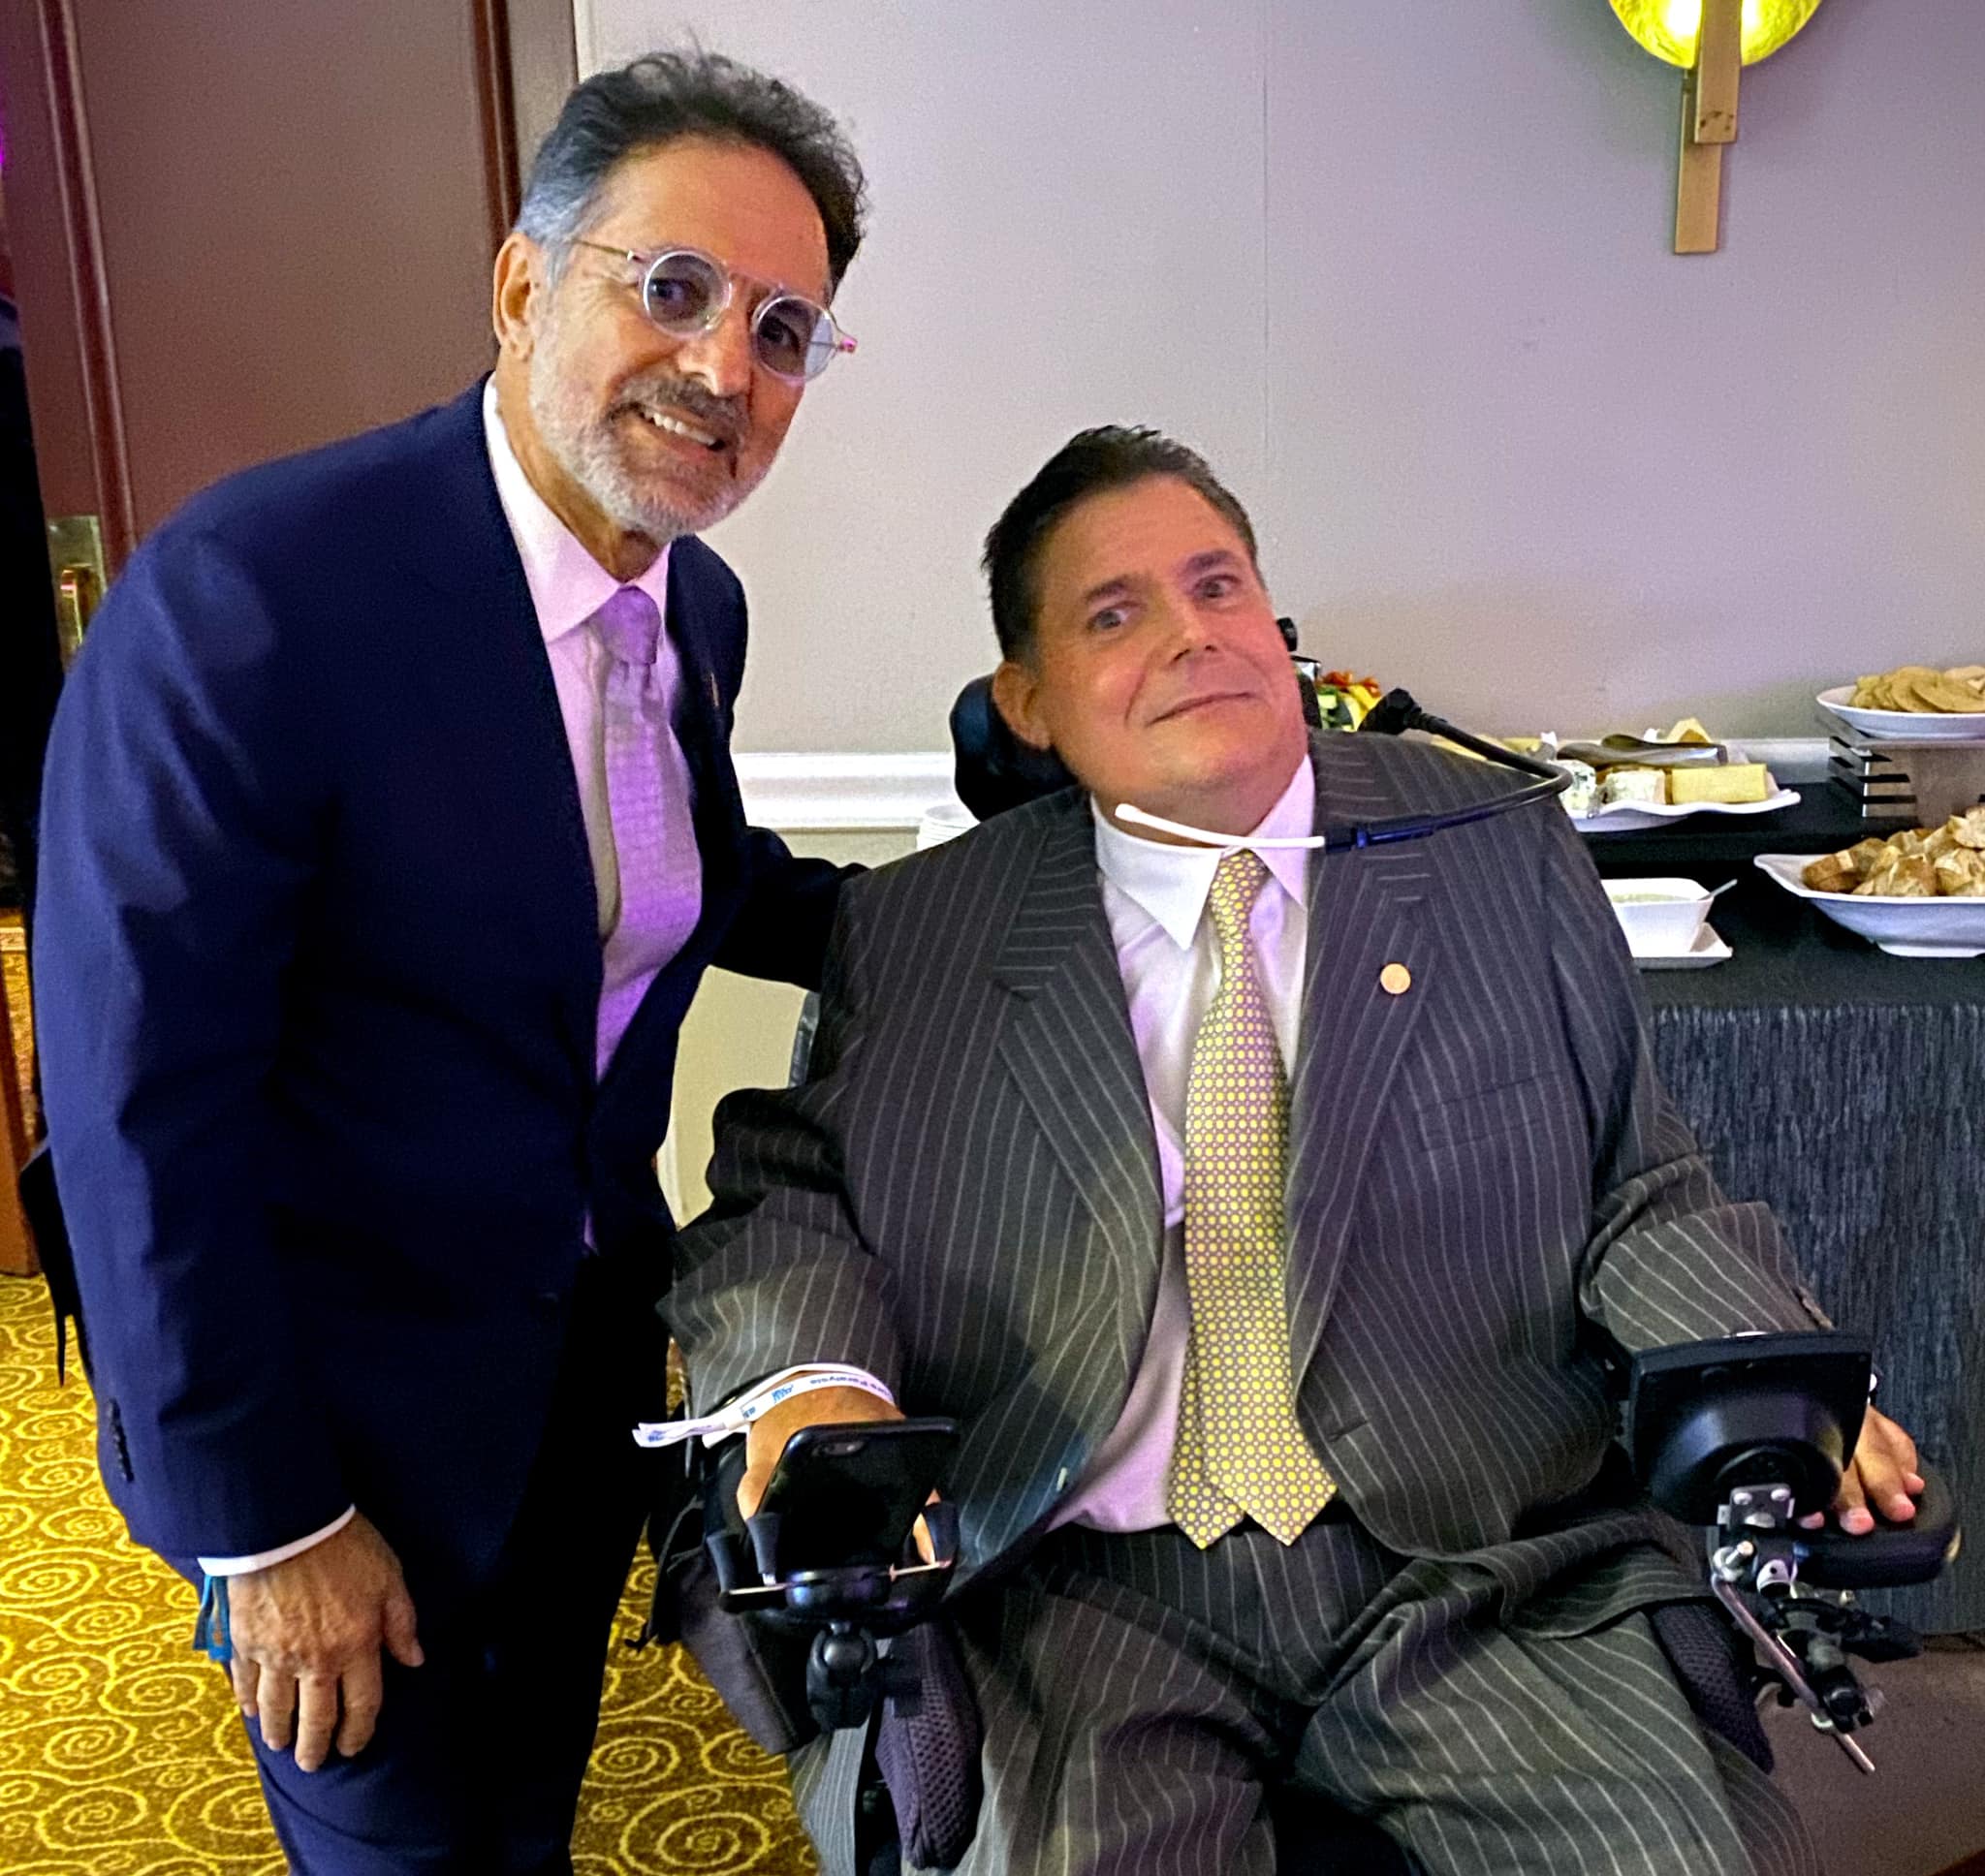 Supporting Nick and Mark Buoniconti on their Journey of Bringing Hope to those with Paralysis